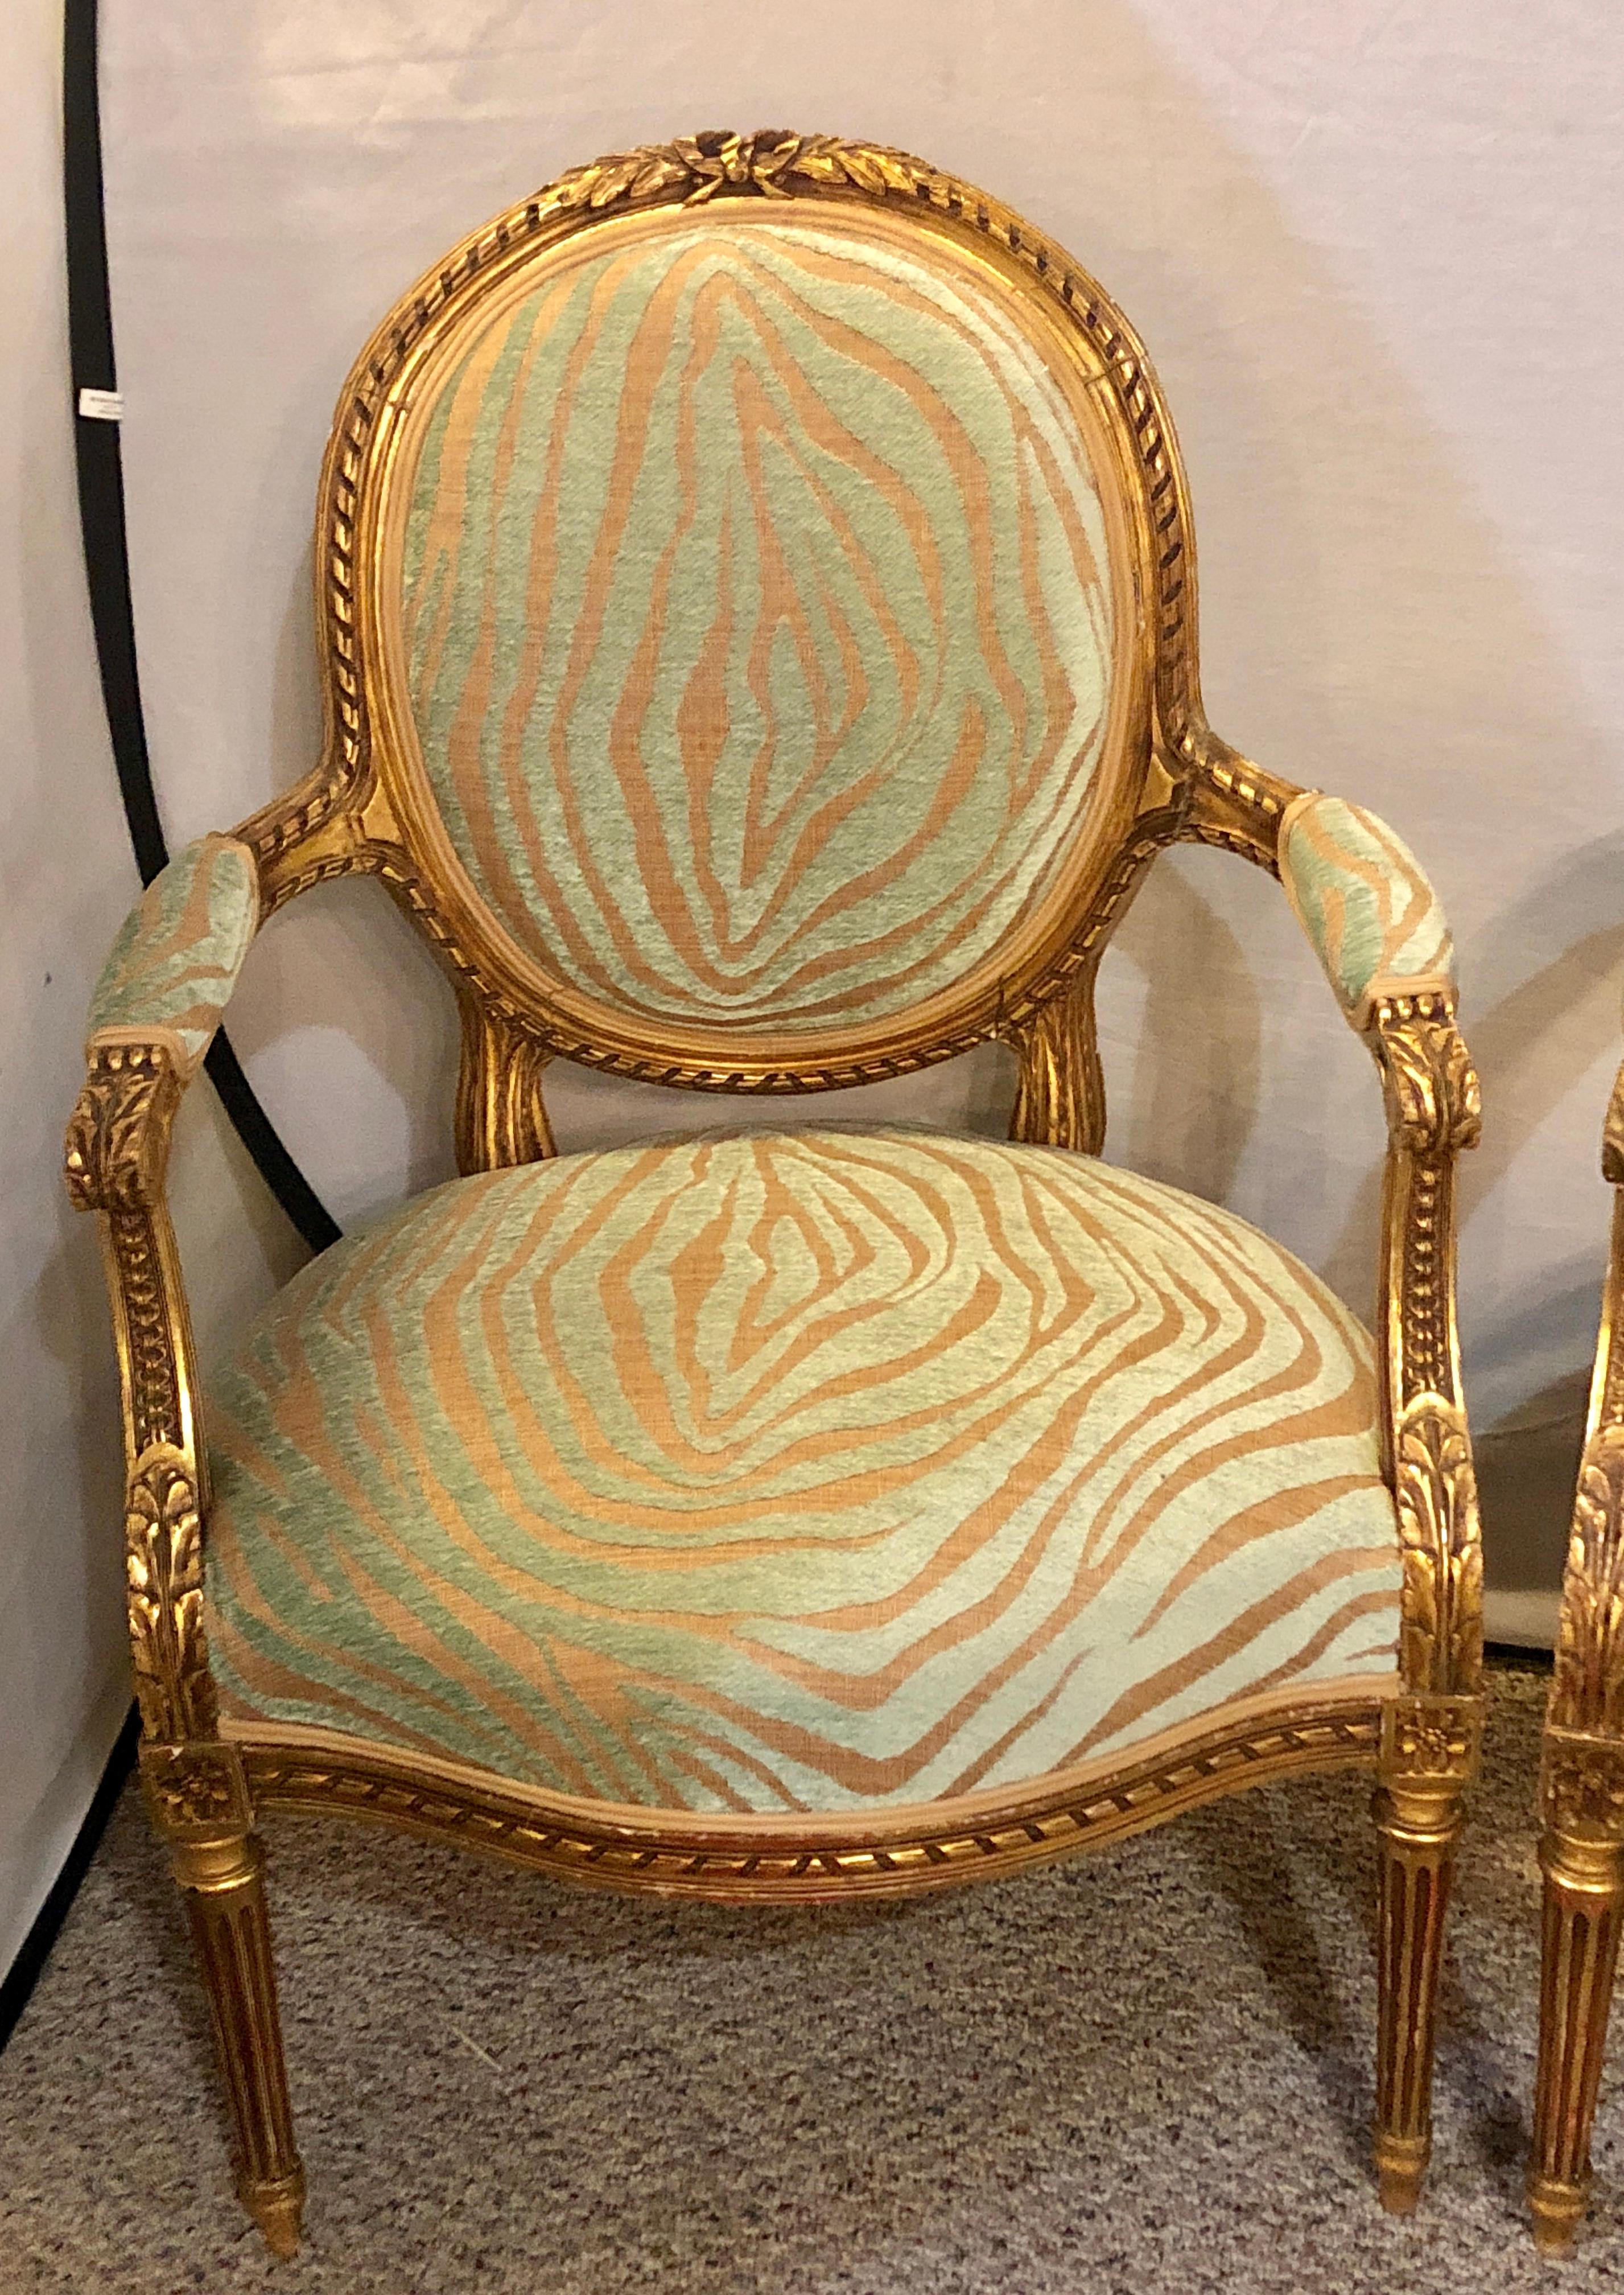 20th Century Pair of Louis XVI Style Green Zebra Striped Fauteuils or Armchairs